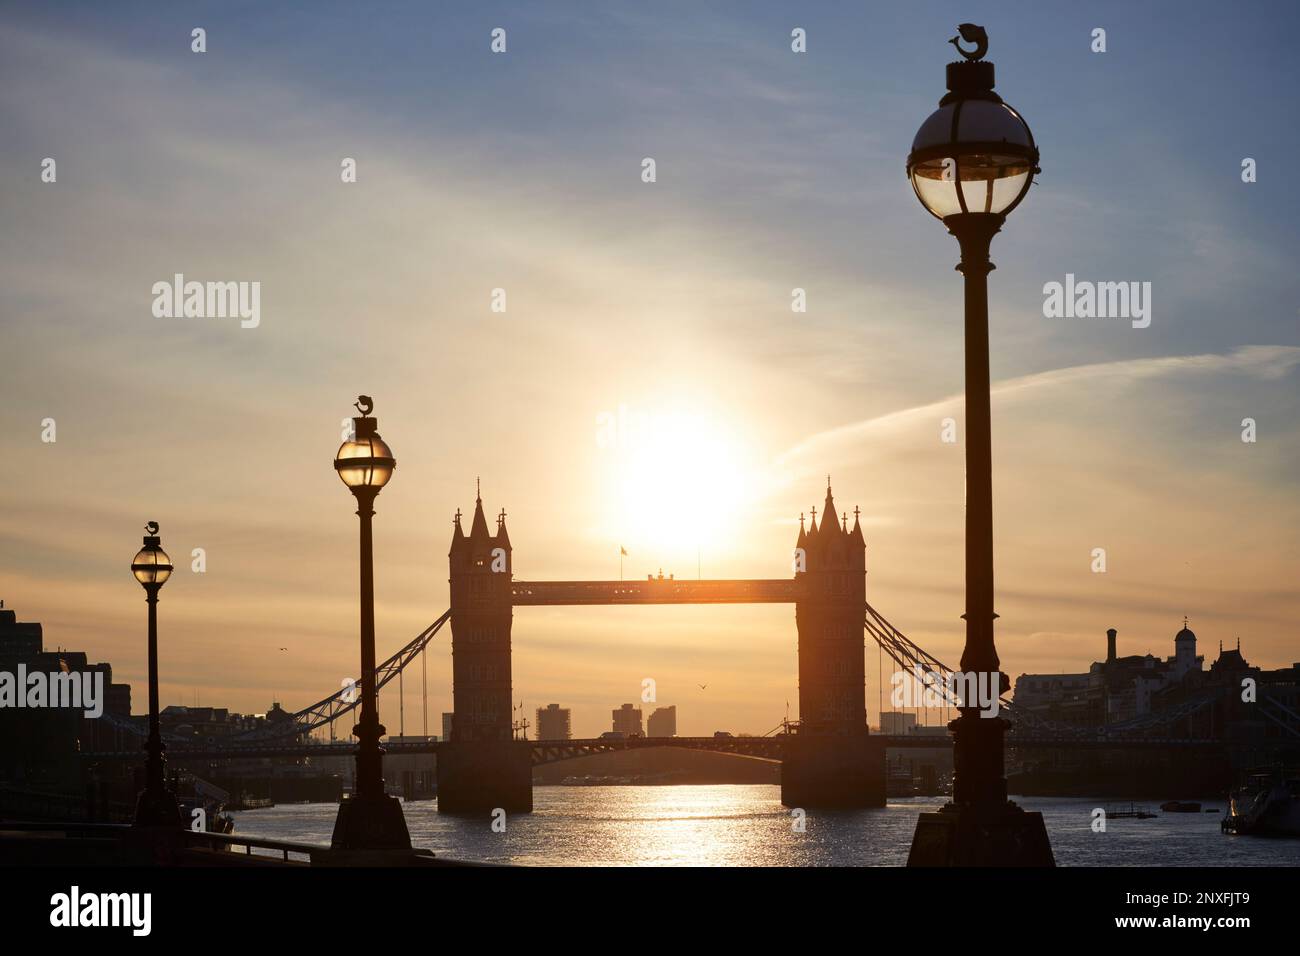 Street lamps and Tower Bridge silhouetted, London, England, GB Stock Photo